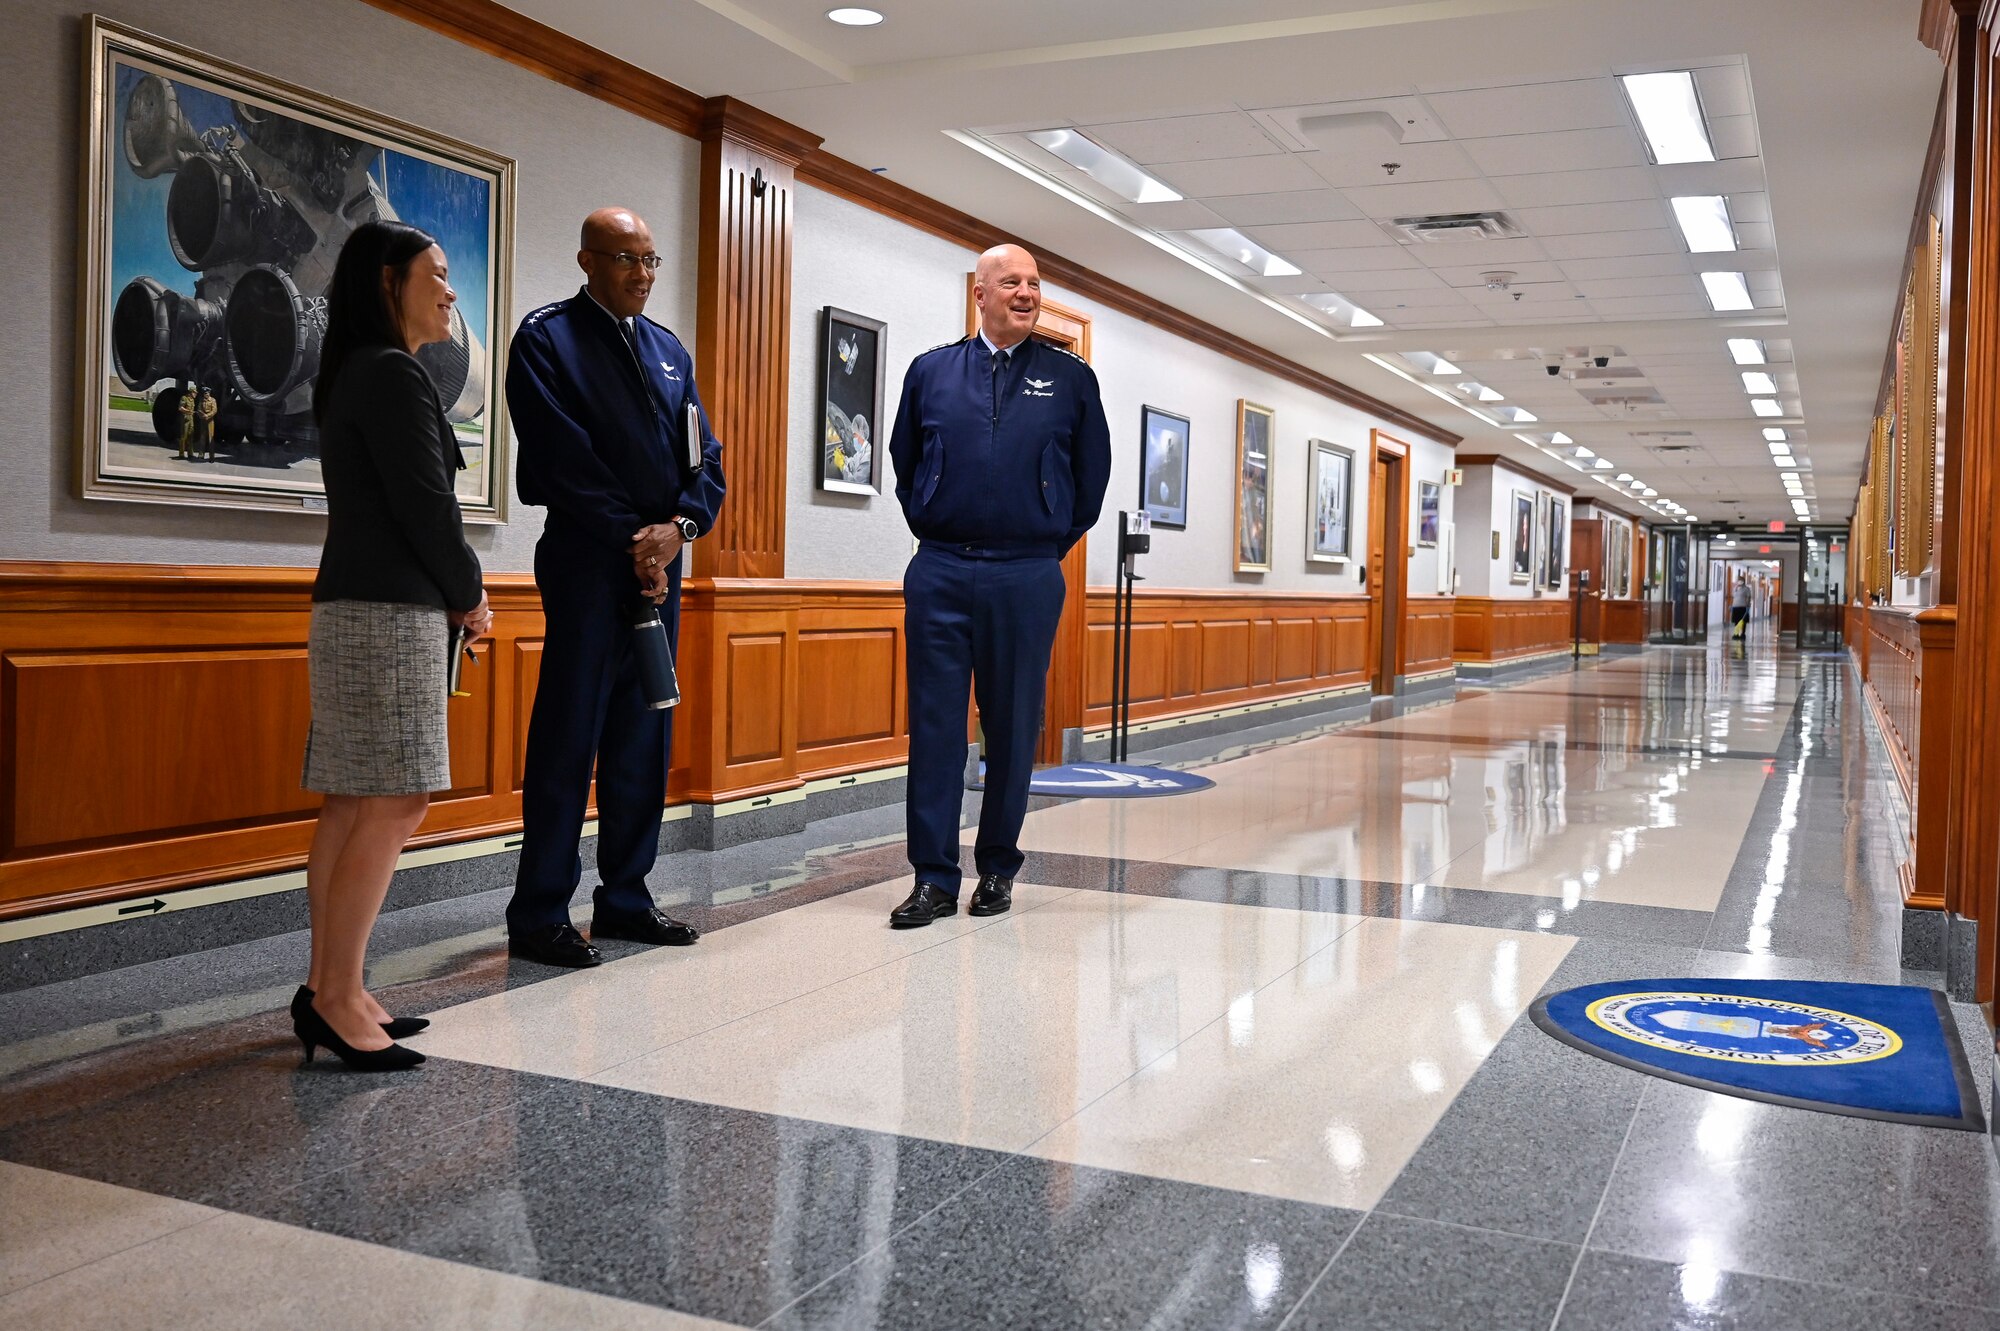 Under Secretary of the Air Force Gina Ortiz Jones, Air Force Chief of Staff Gen. CQ Brown, Jr., and Chief of Space Operations Gen. John W. “Jay” Raymond talk prior to a meeting with Secretary of the Air Force Frank Kendall at the Pentagon, Arlington, Va., July 28, 2021. (U.S. Air Force photo by Eric Dietrich)